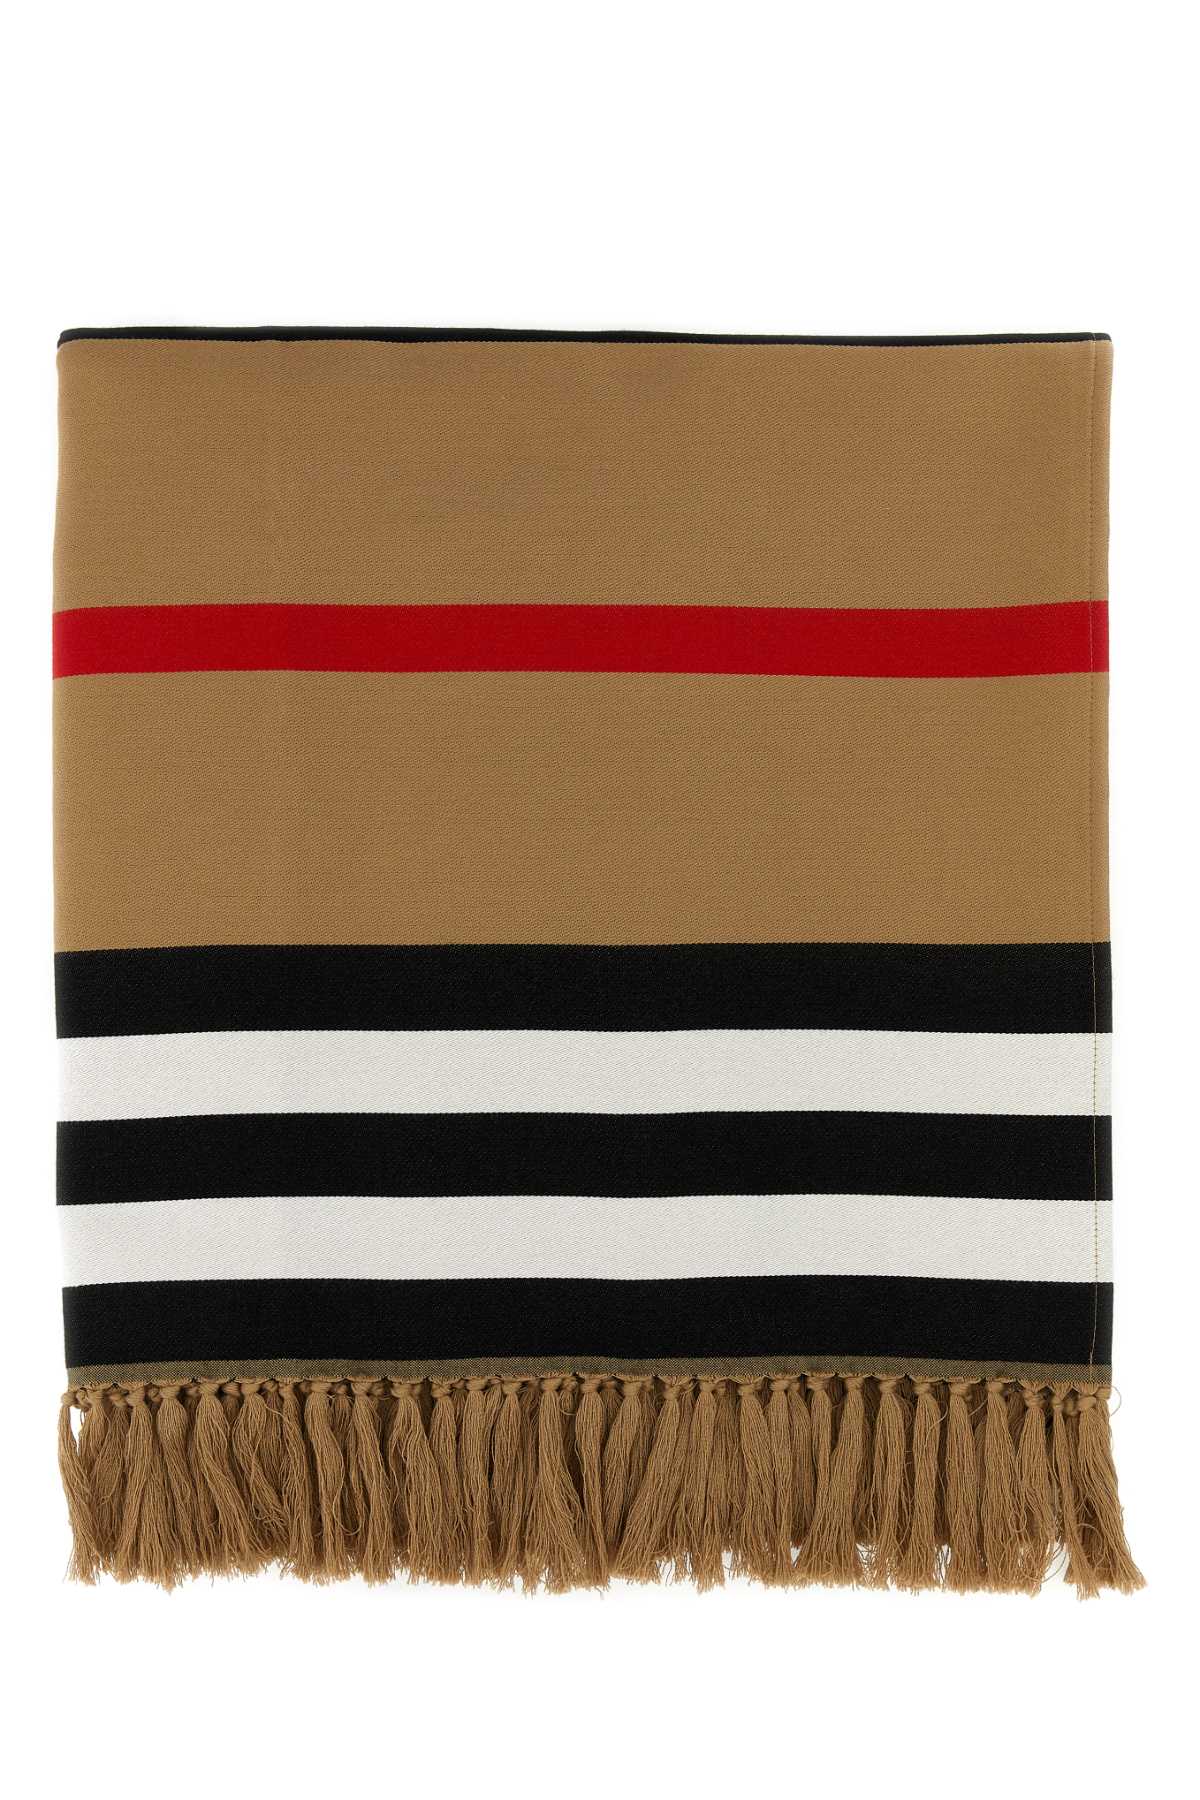 Burberry Embroidered Cotton Blanket